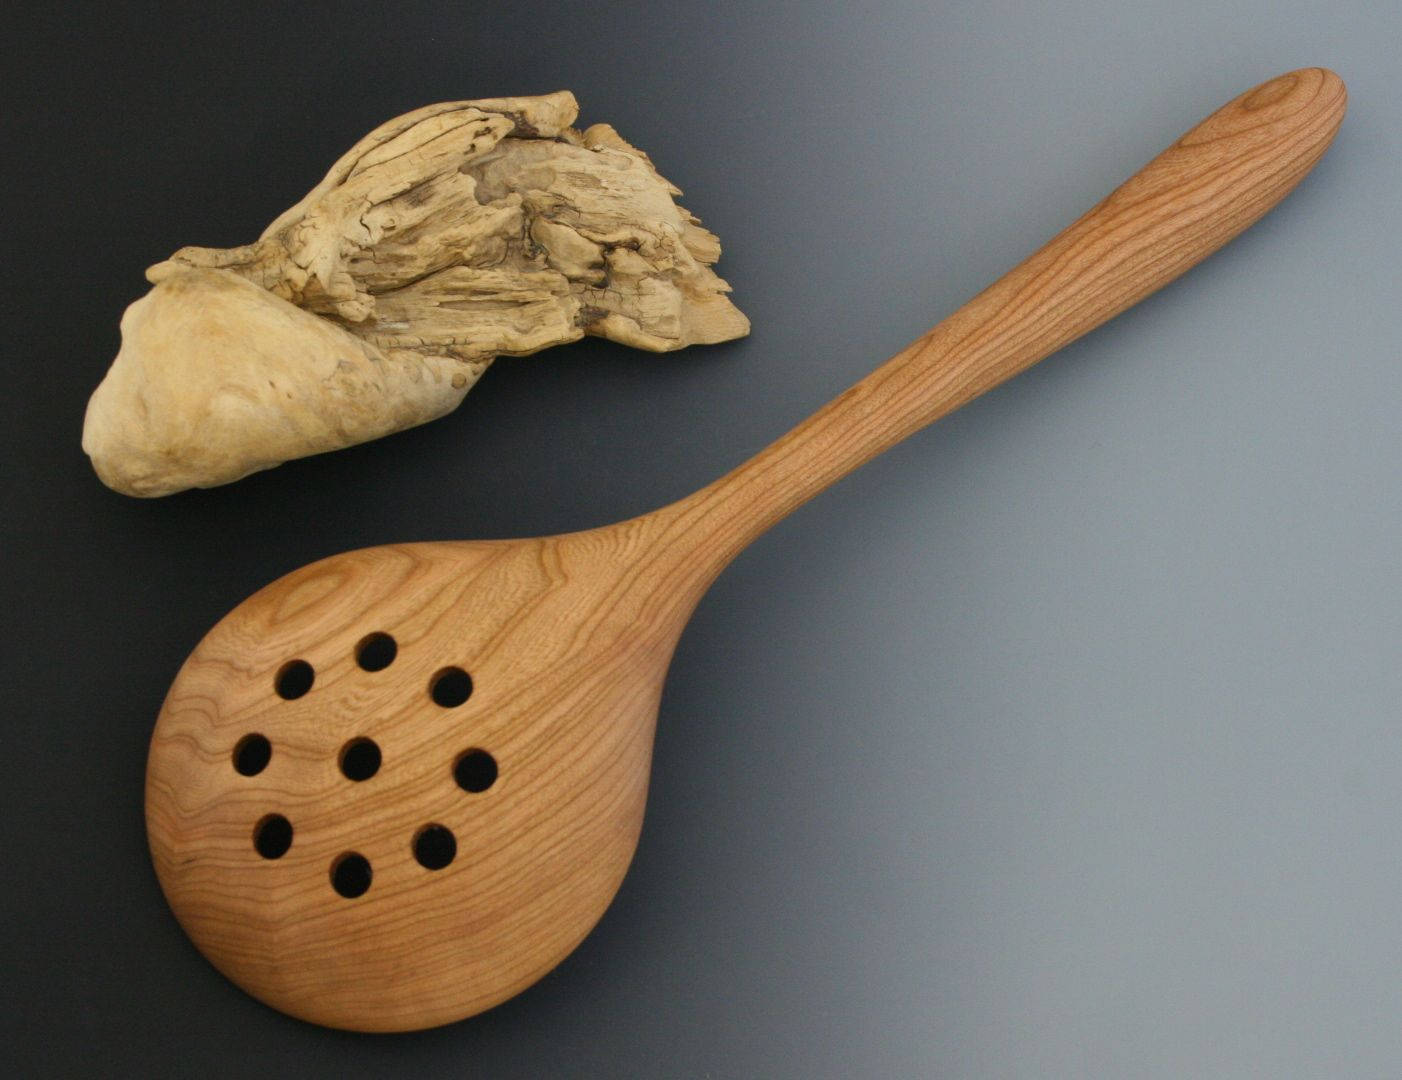 Stoneware Strainer Spoon — The Shop at Graber Co